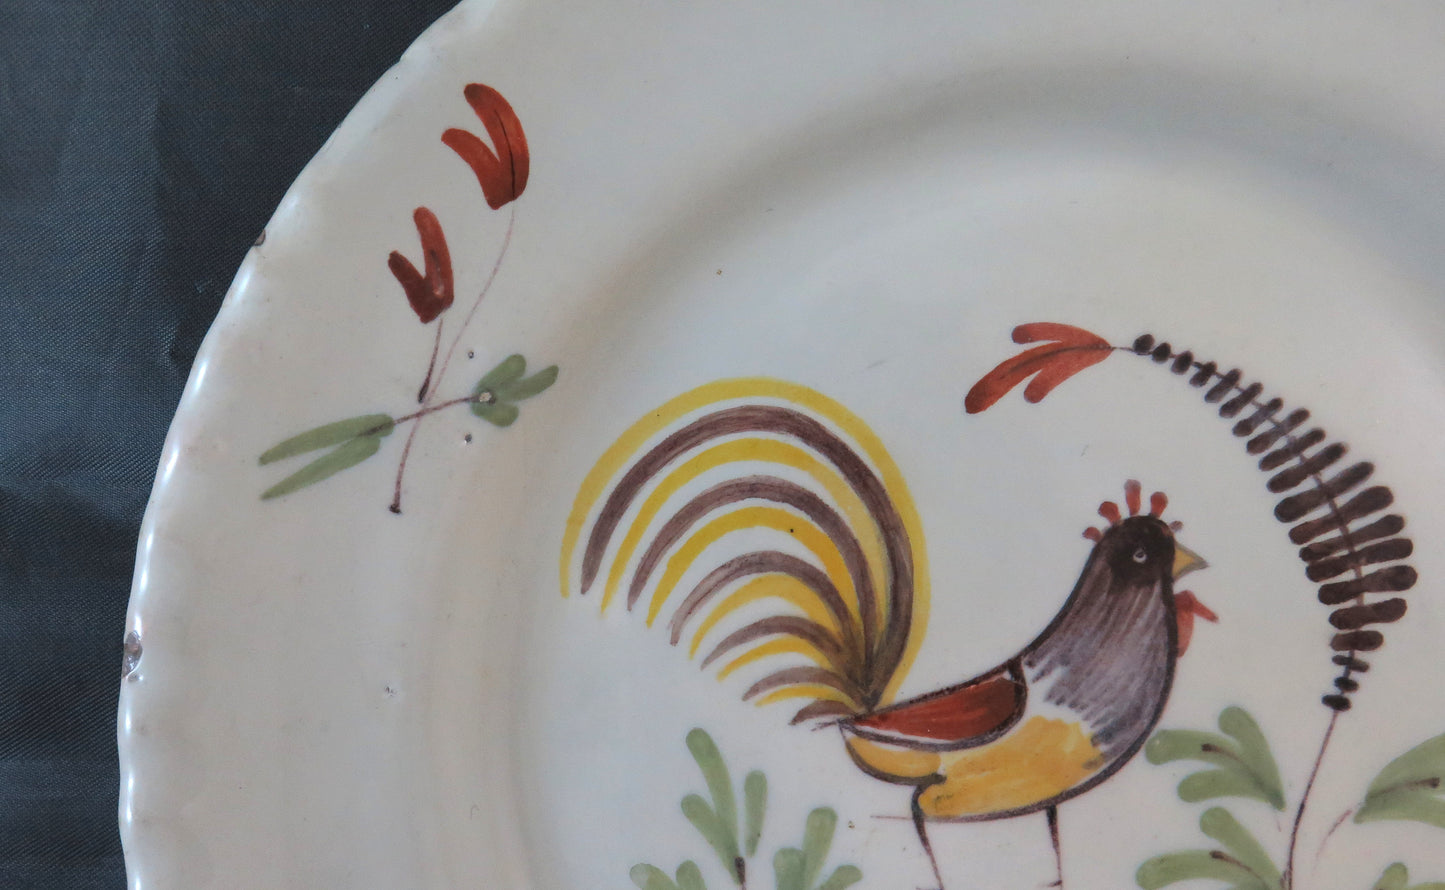 ANTIQUE FRENCH CERAMIC PLATE HAND PAINTED WITH ROOSTER AND FLOWERS BM25